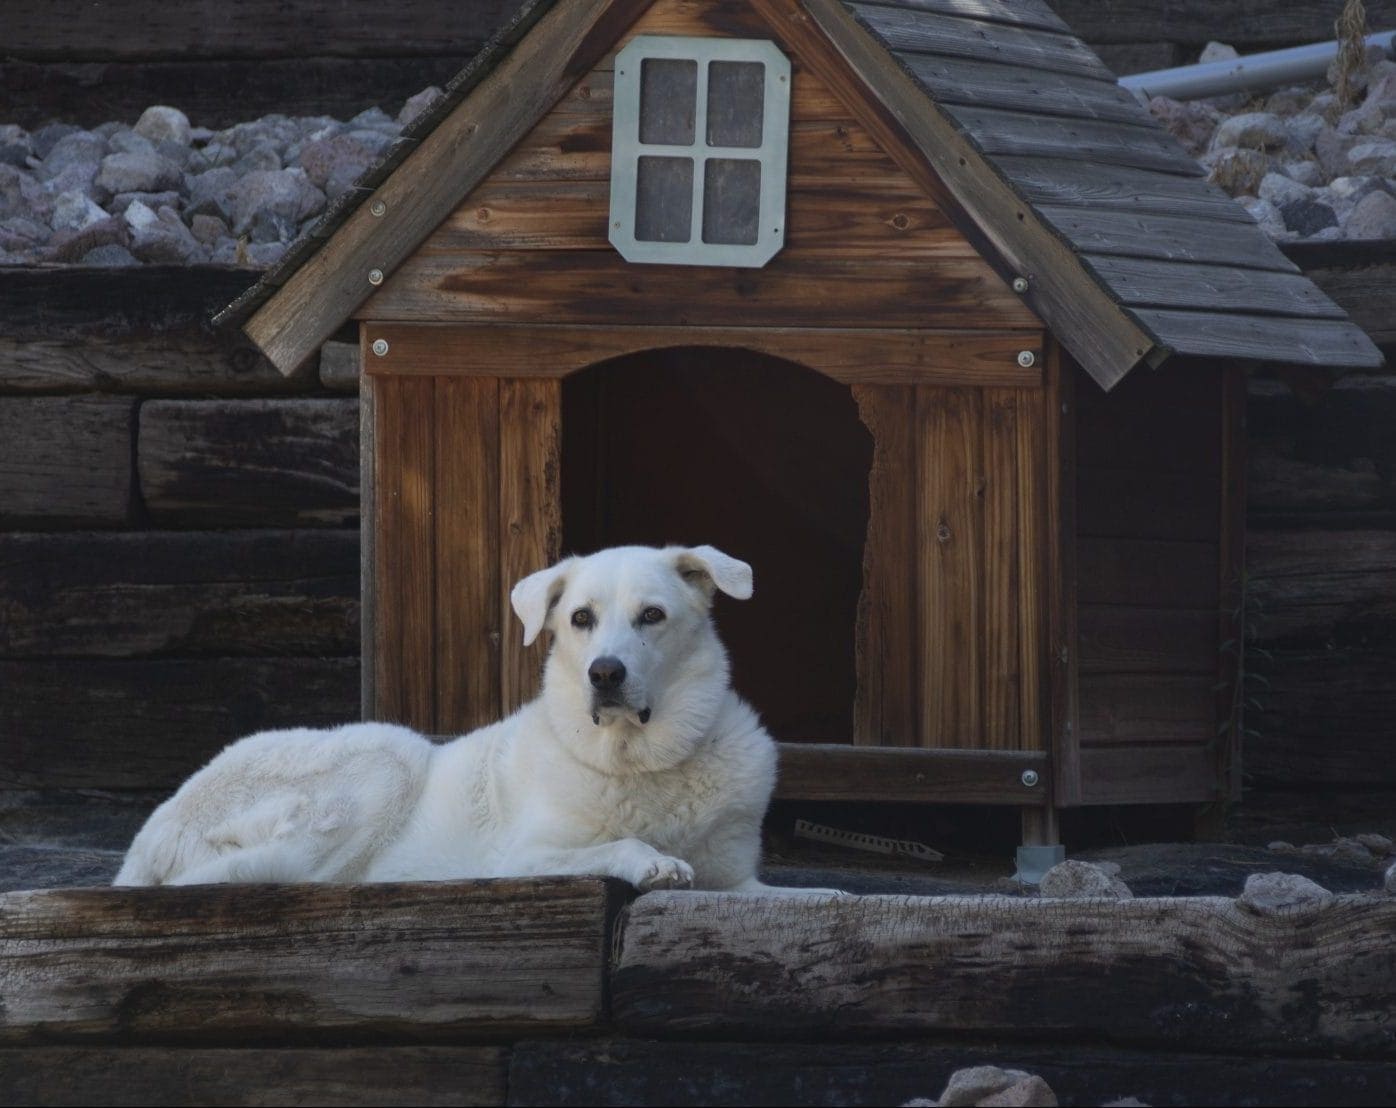 a dog house during winter